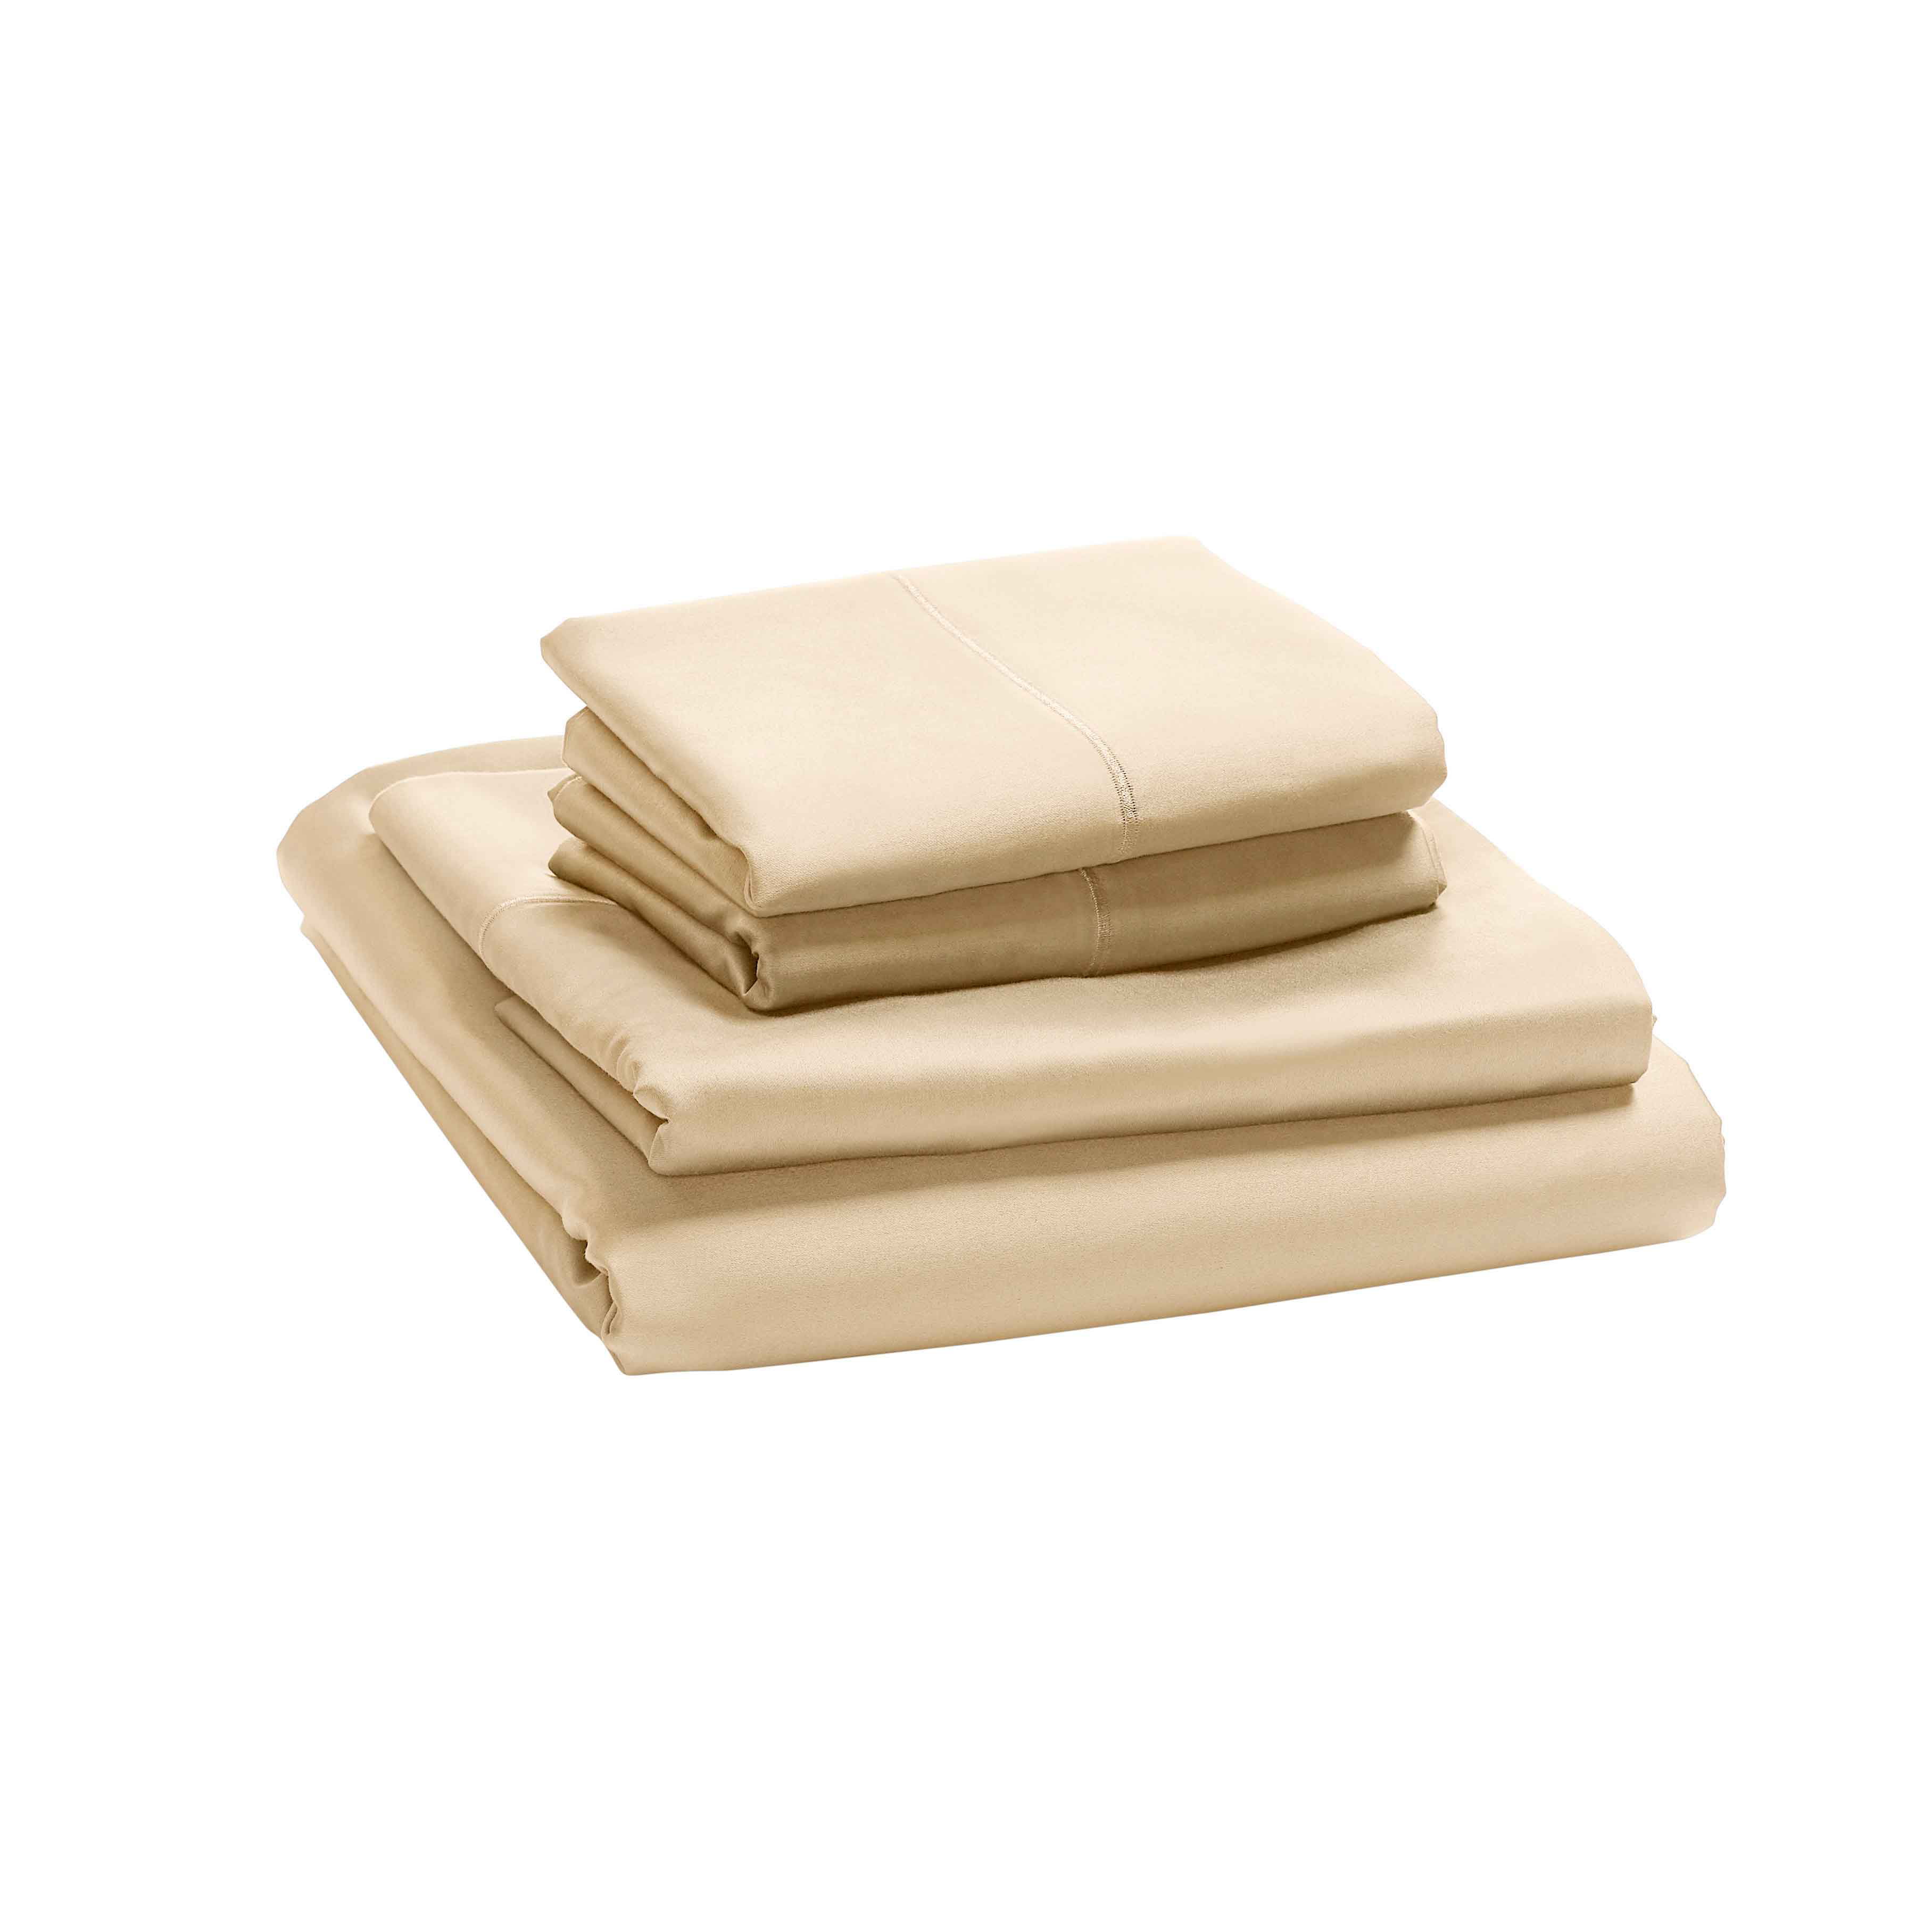 Hotel Style Egyptian Cotton 1000 Thread Count Bedding Sheet Set